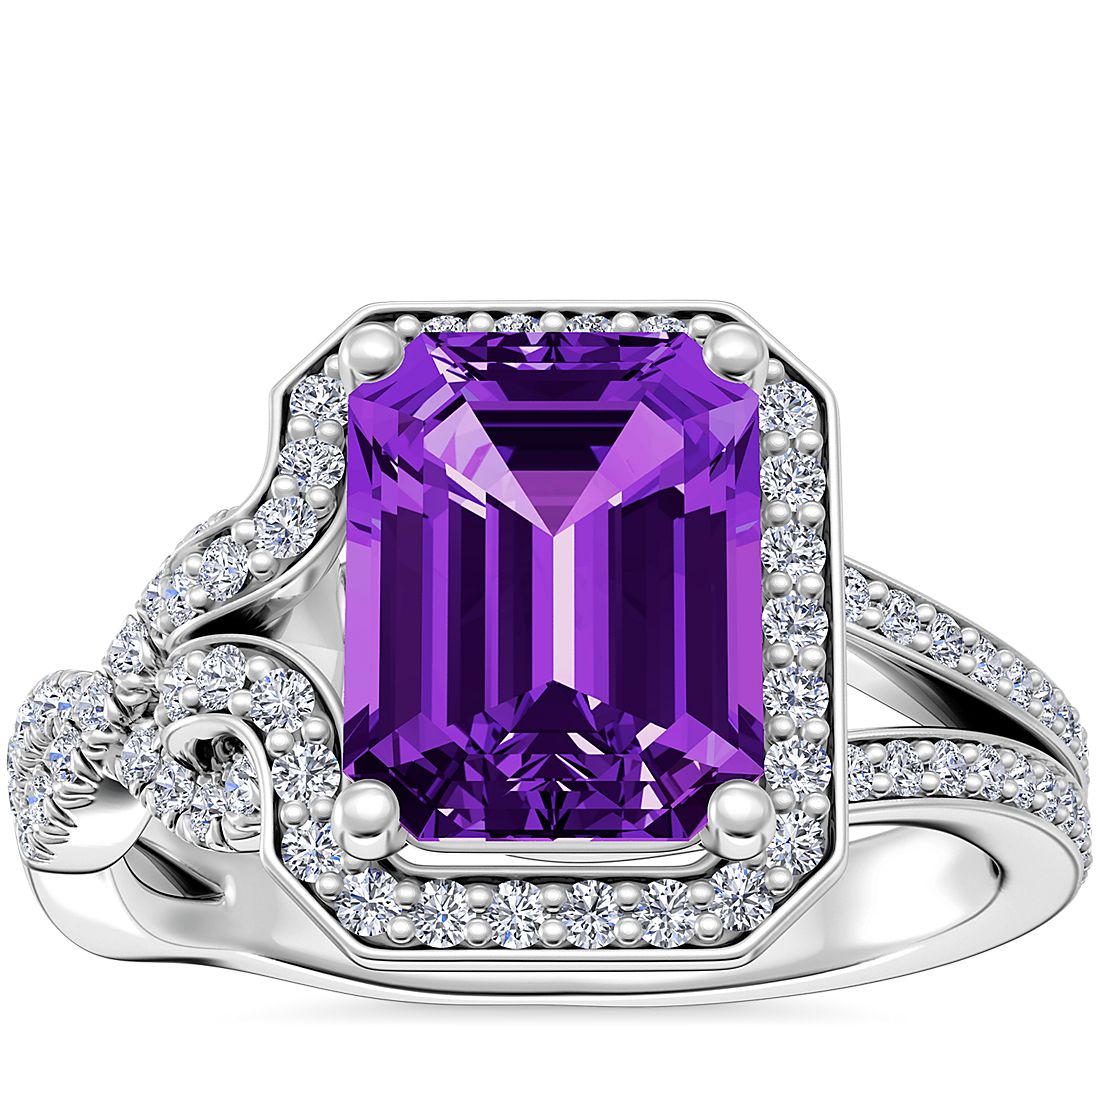 Asymmetrical Diamond Infinity Halo Engagement Ring with Emerald-Cut Amethyst in Platinum (9x7mm)